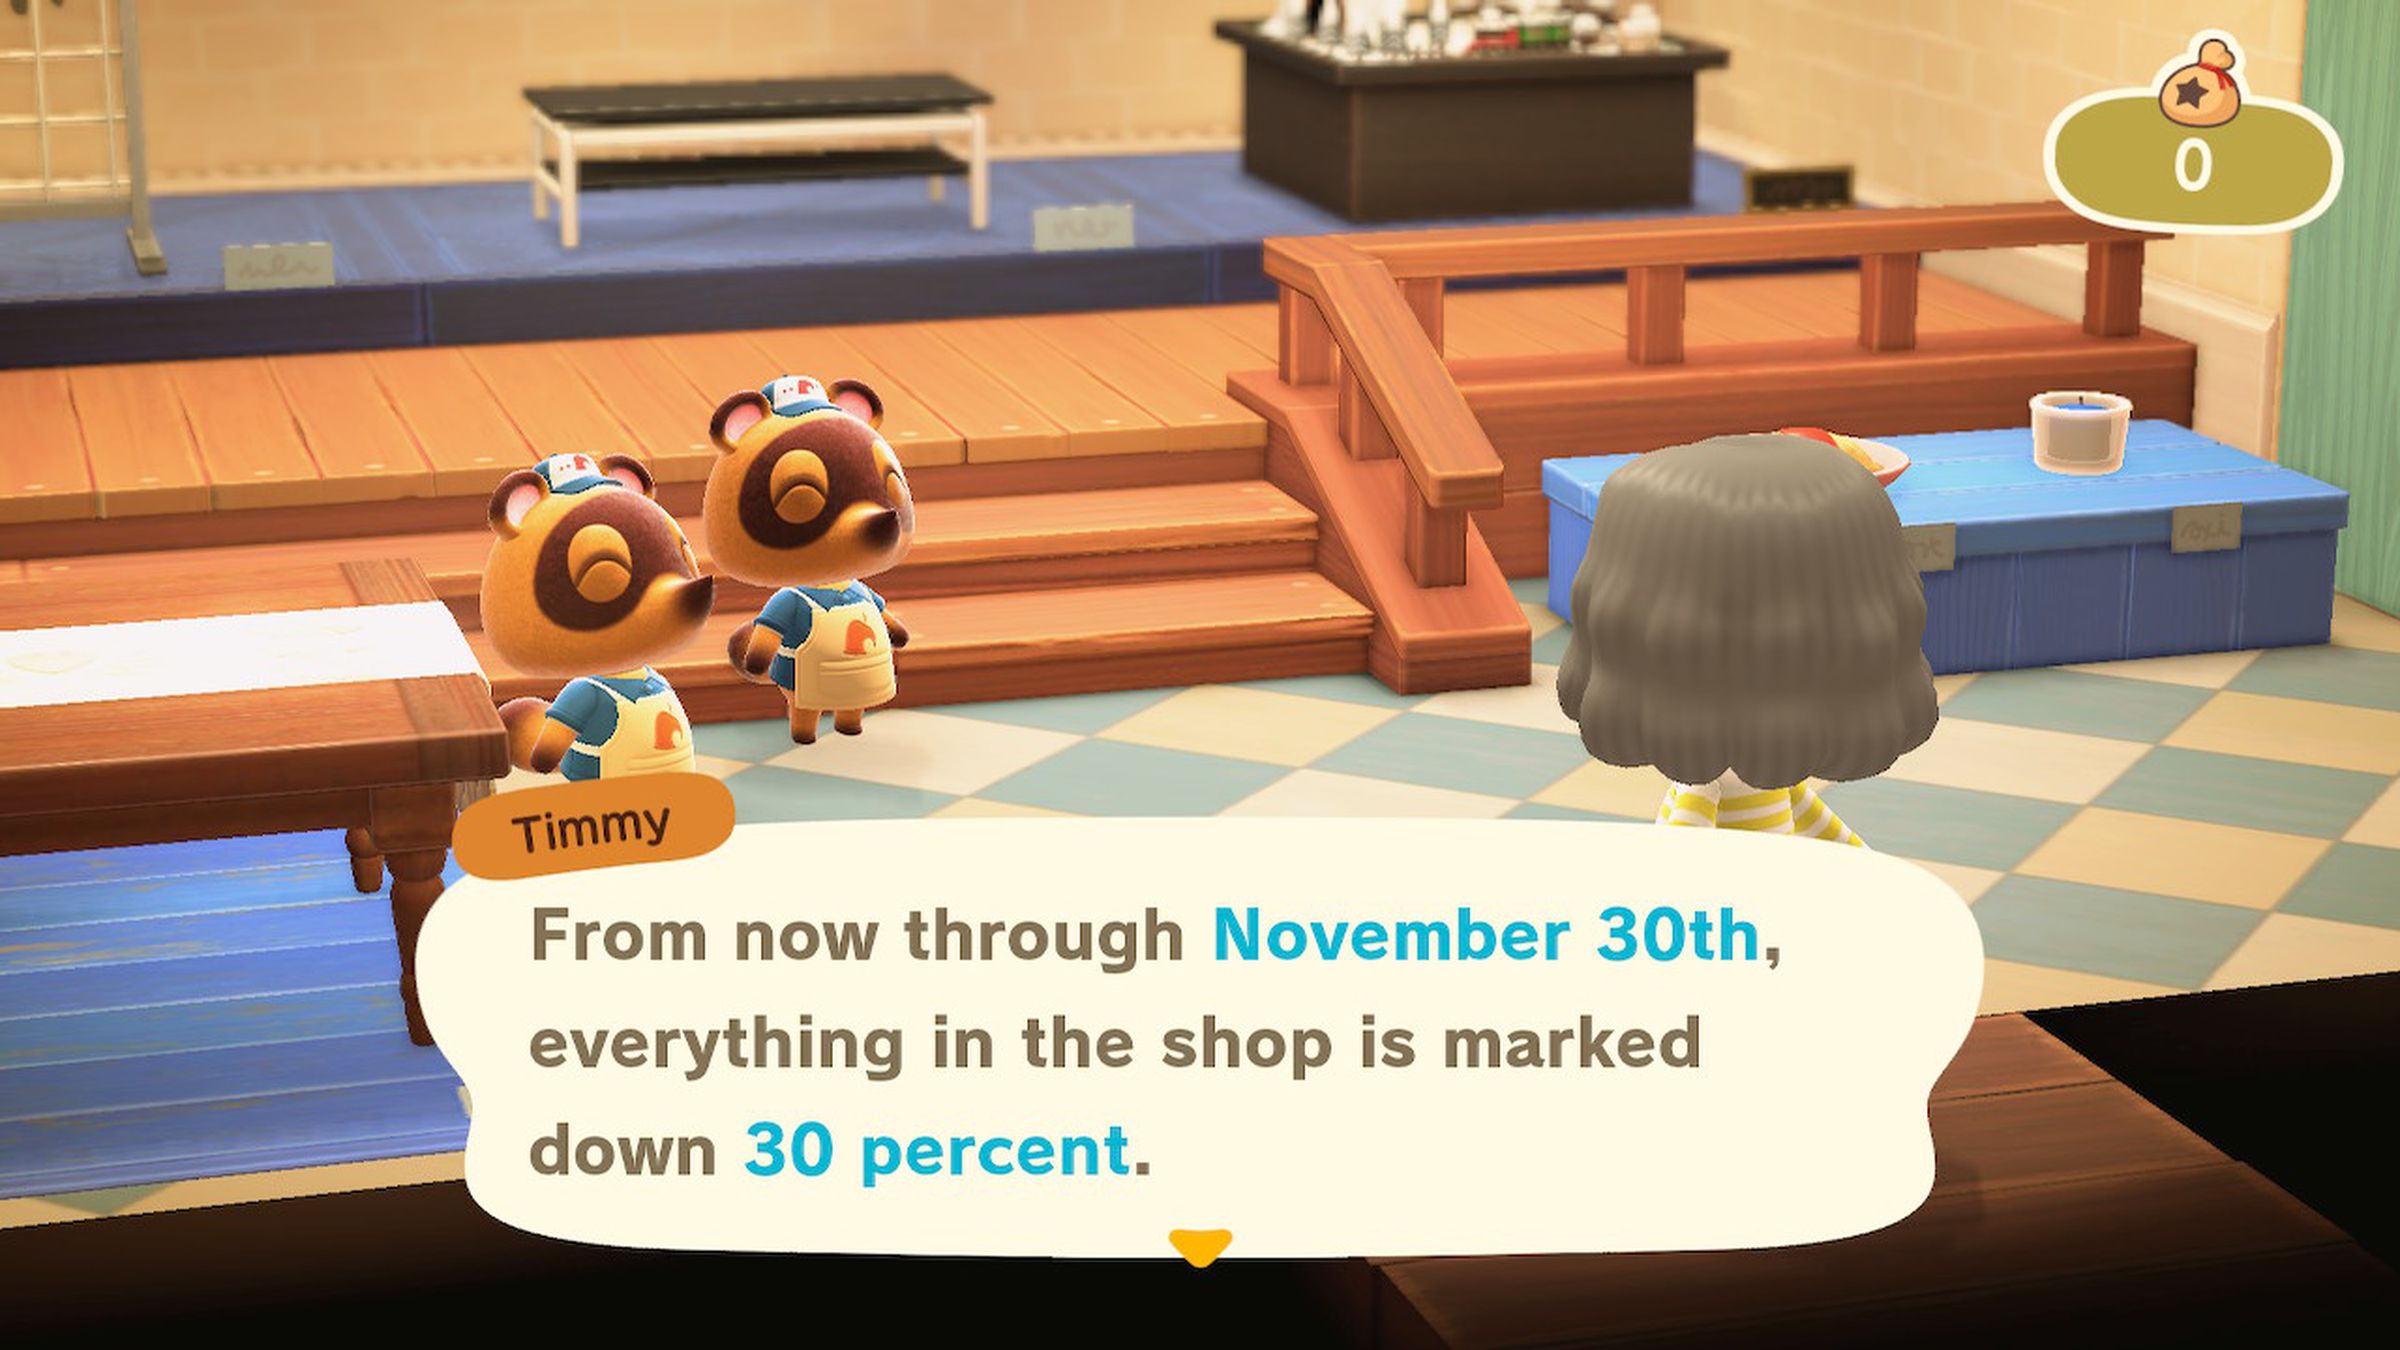 Timmy telling the player that “from now until November 30th, everything in the Nook shop is marked down 30 percent.”